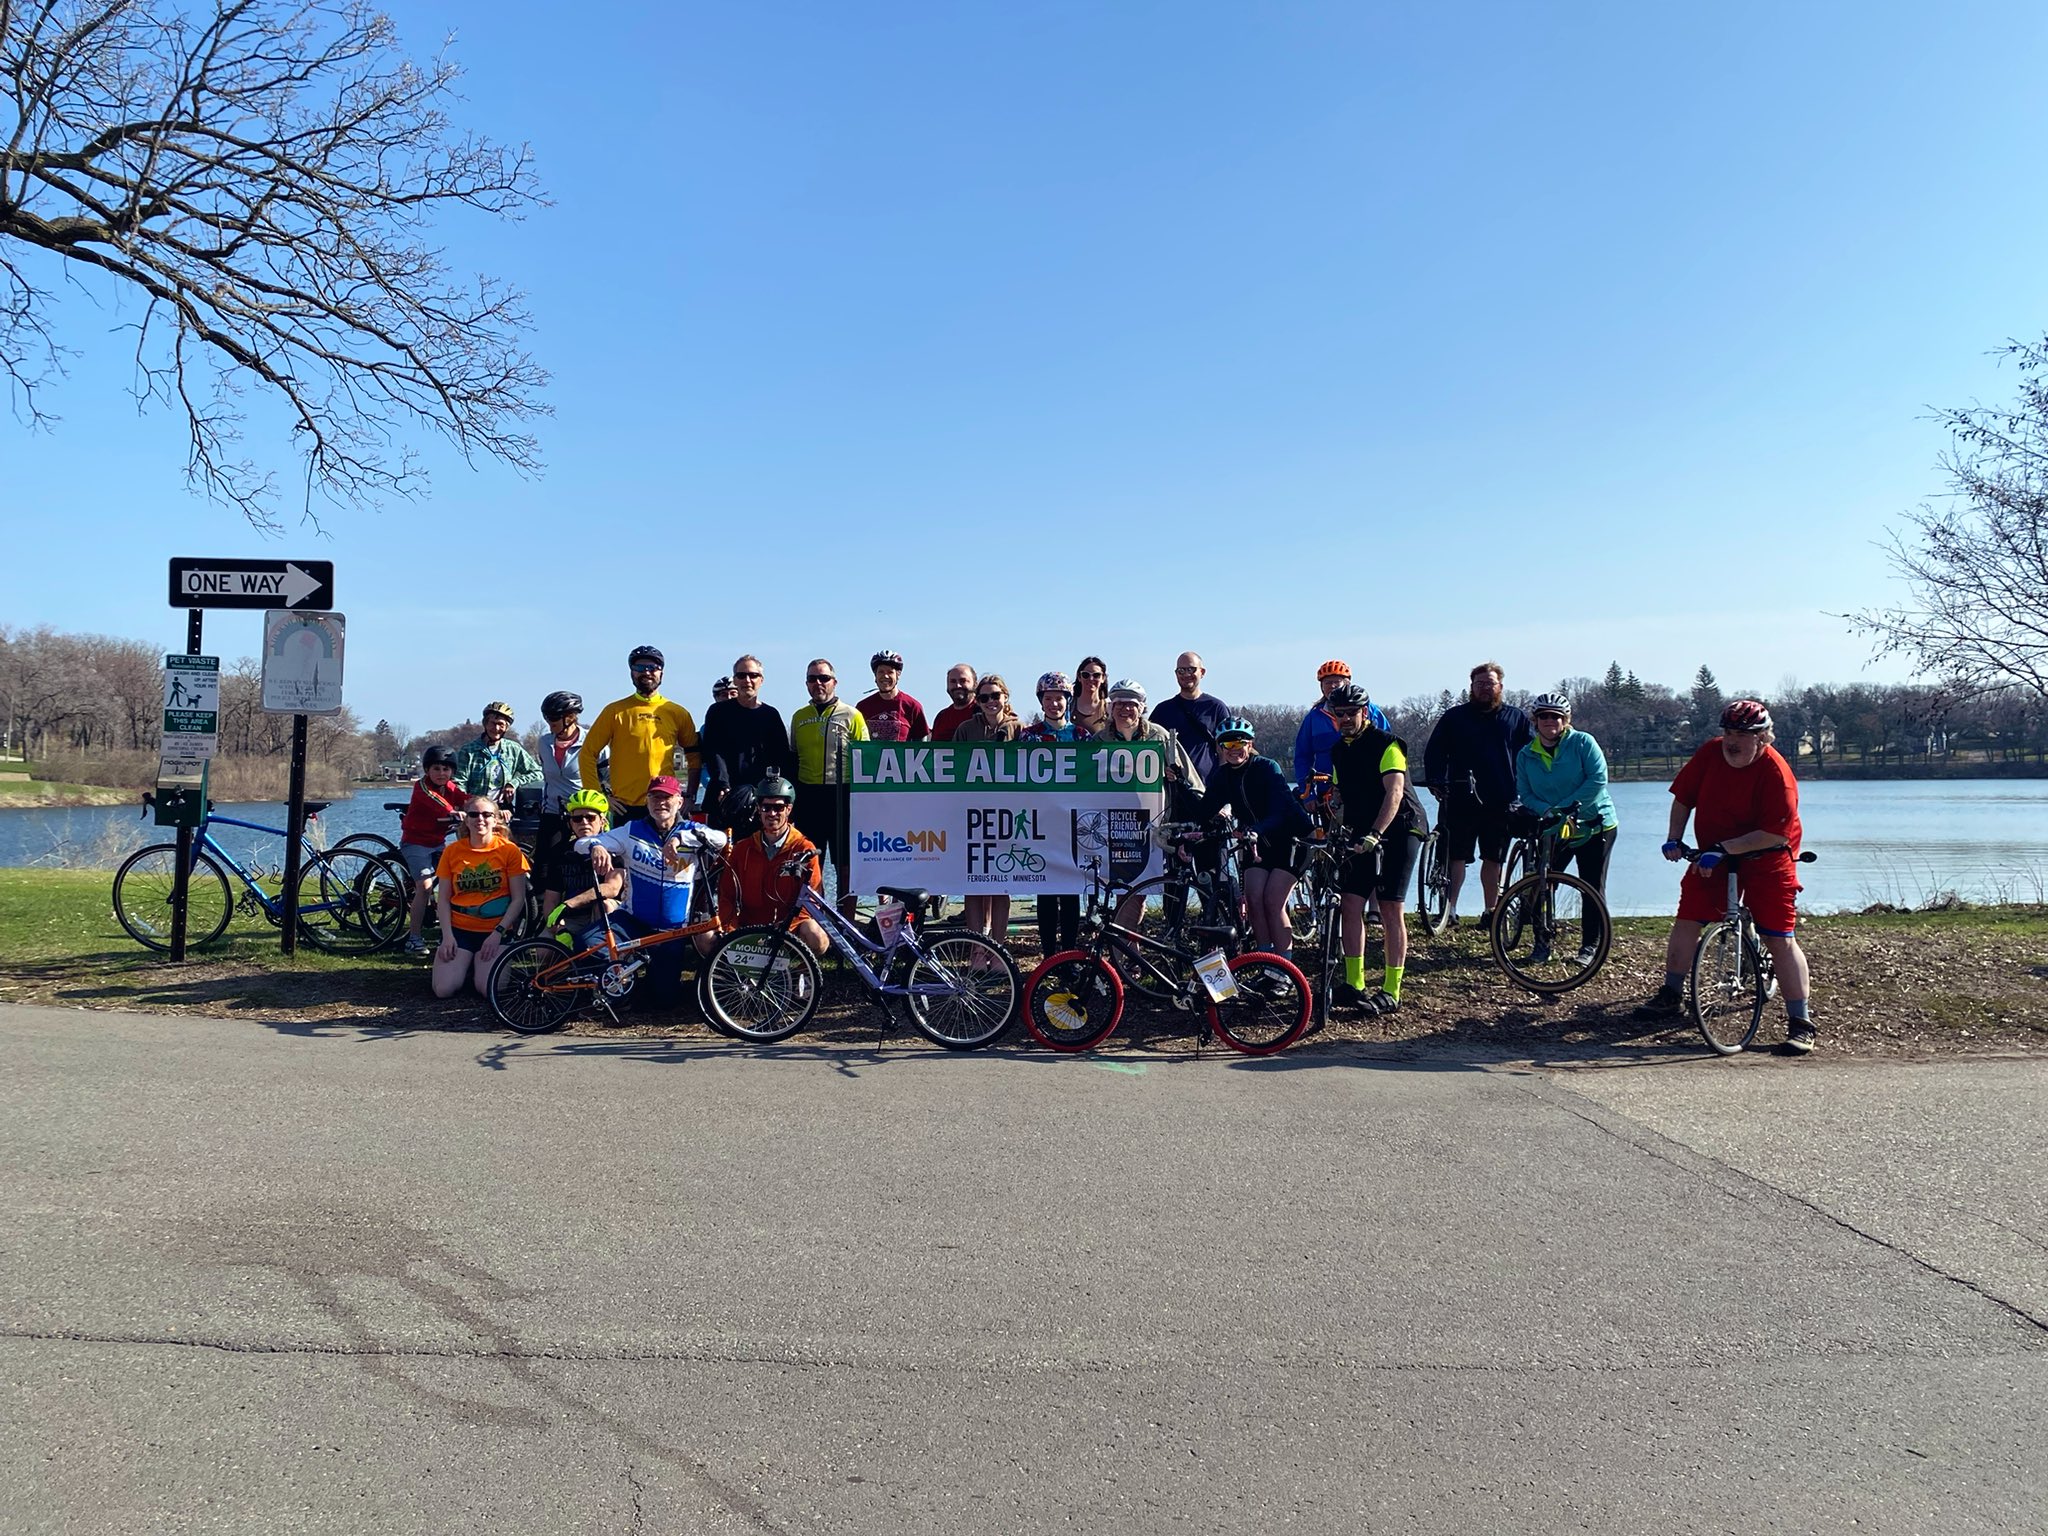 A group of over 15 people gather for a photo during the Lake Alice 100